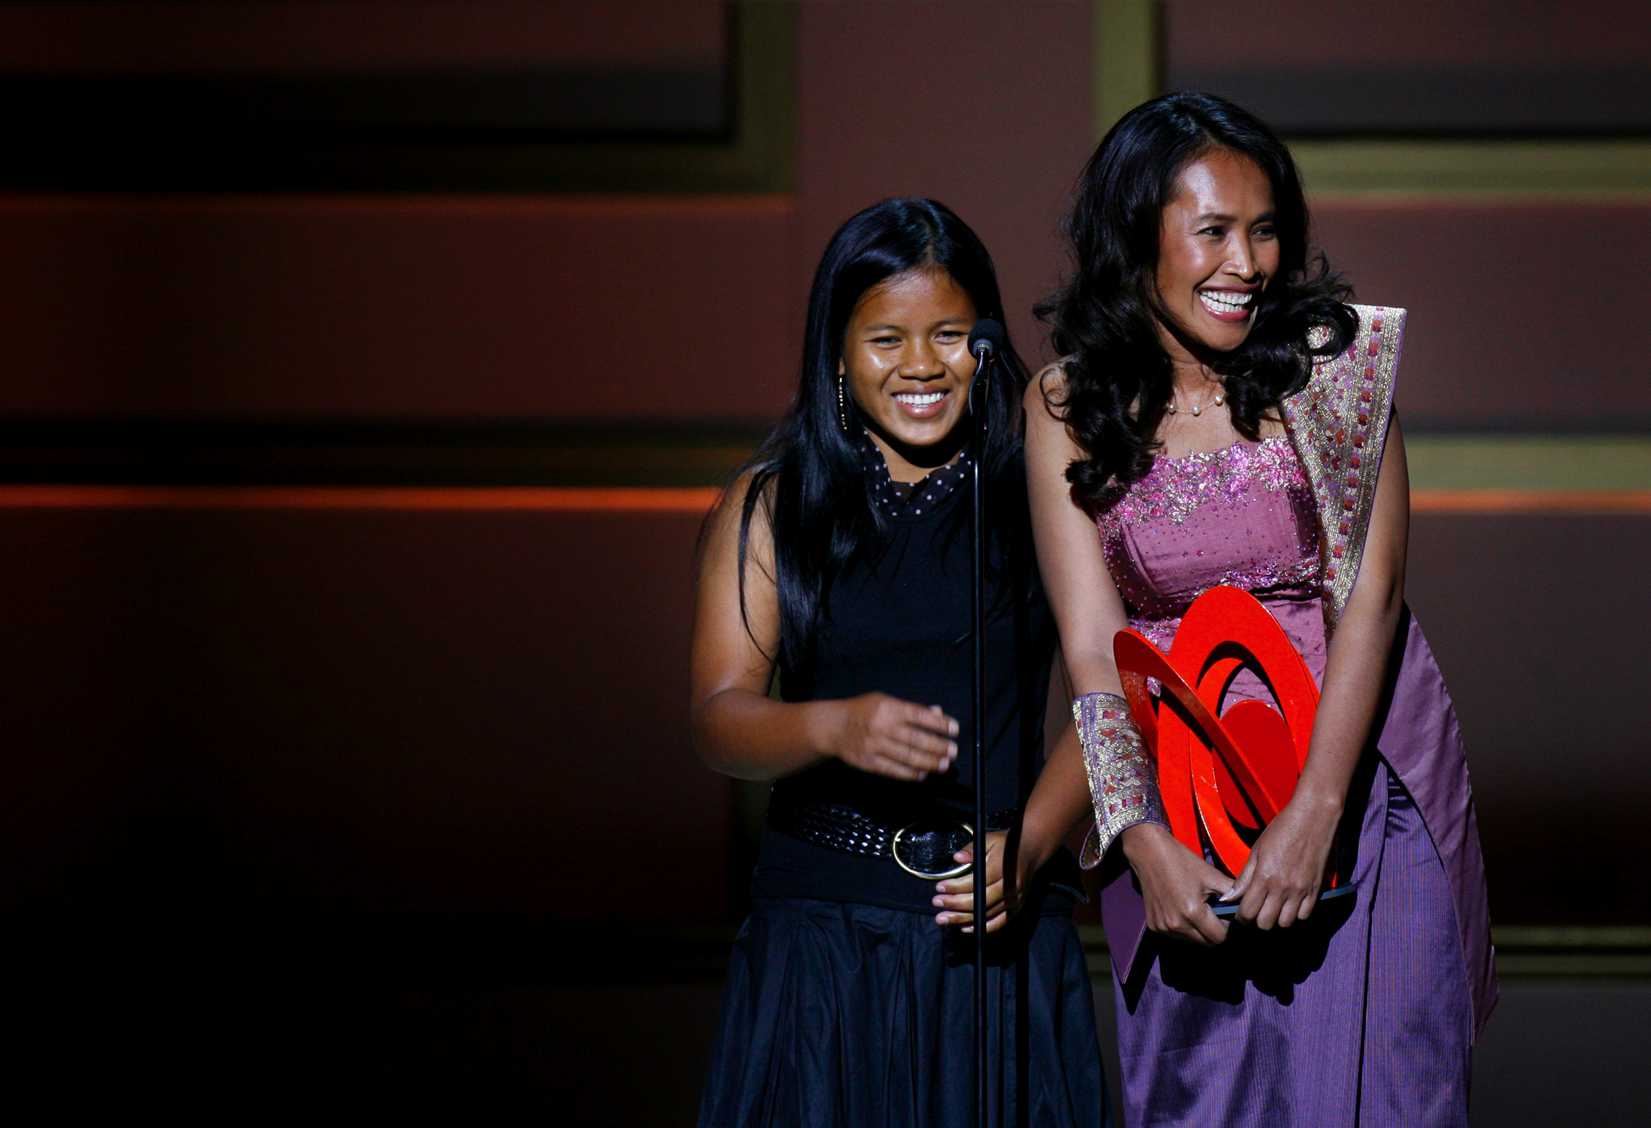 Cambodian activist Somaly Mam (R) accepts a "Woman of the Year" award with a child she rescued from sexual slavery, during the 2006 Glamour Magazine "Women of the Year" Honors award show in New York City October 30, 2006. (Lucas Jackson—Reuters)